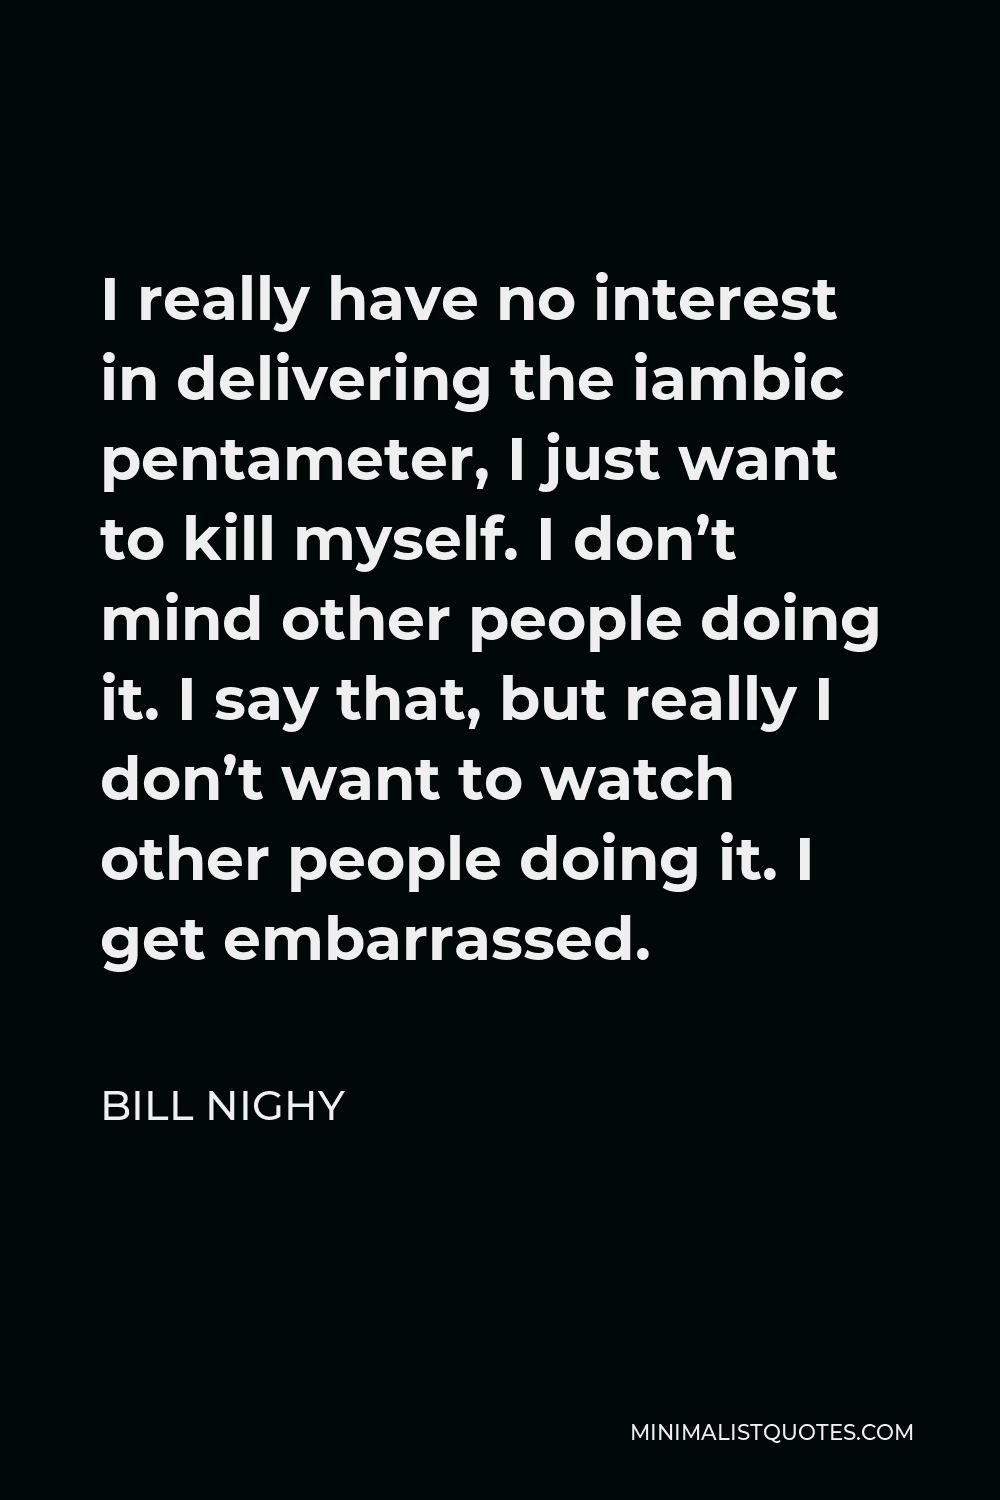 Bill Nighy Quote - I really have no interest in delivering the iambic pentameter, I just want to kill myself. I don’t mind other people doing it. I say that, but really I don’t want to watch other people doing it. I get embarrassed.